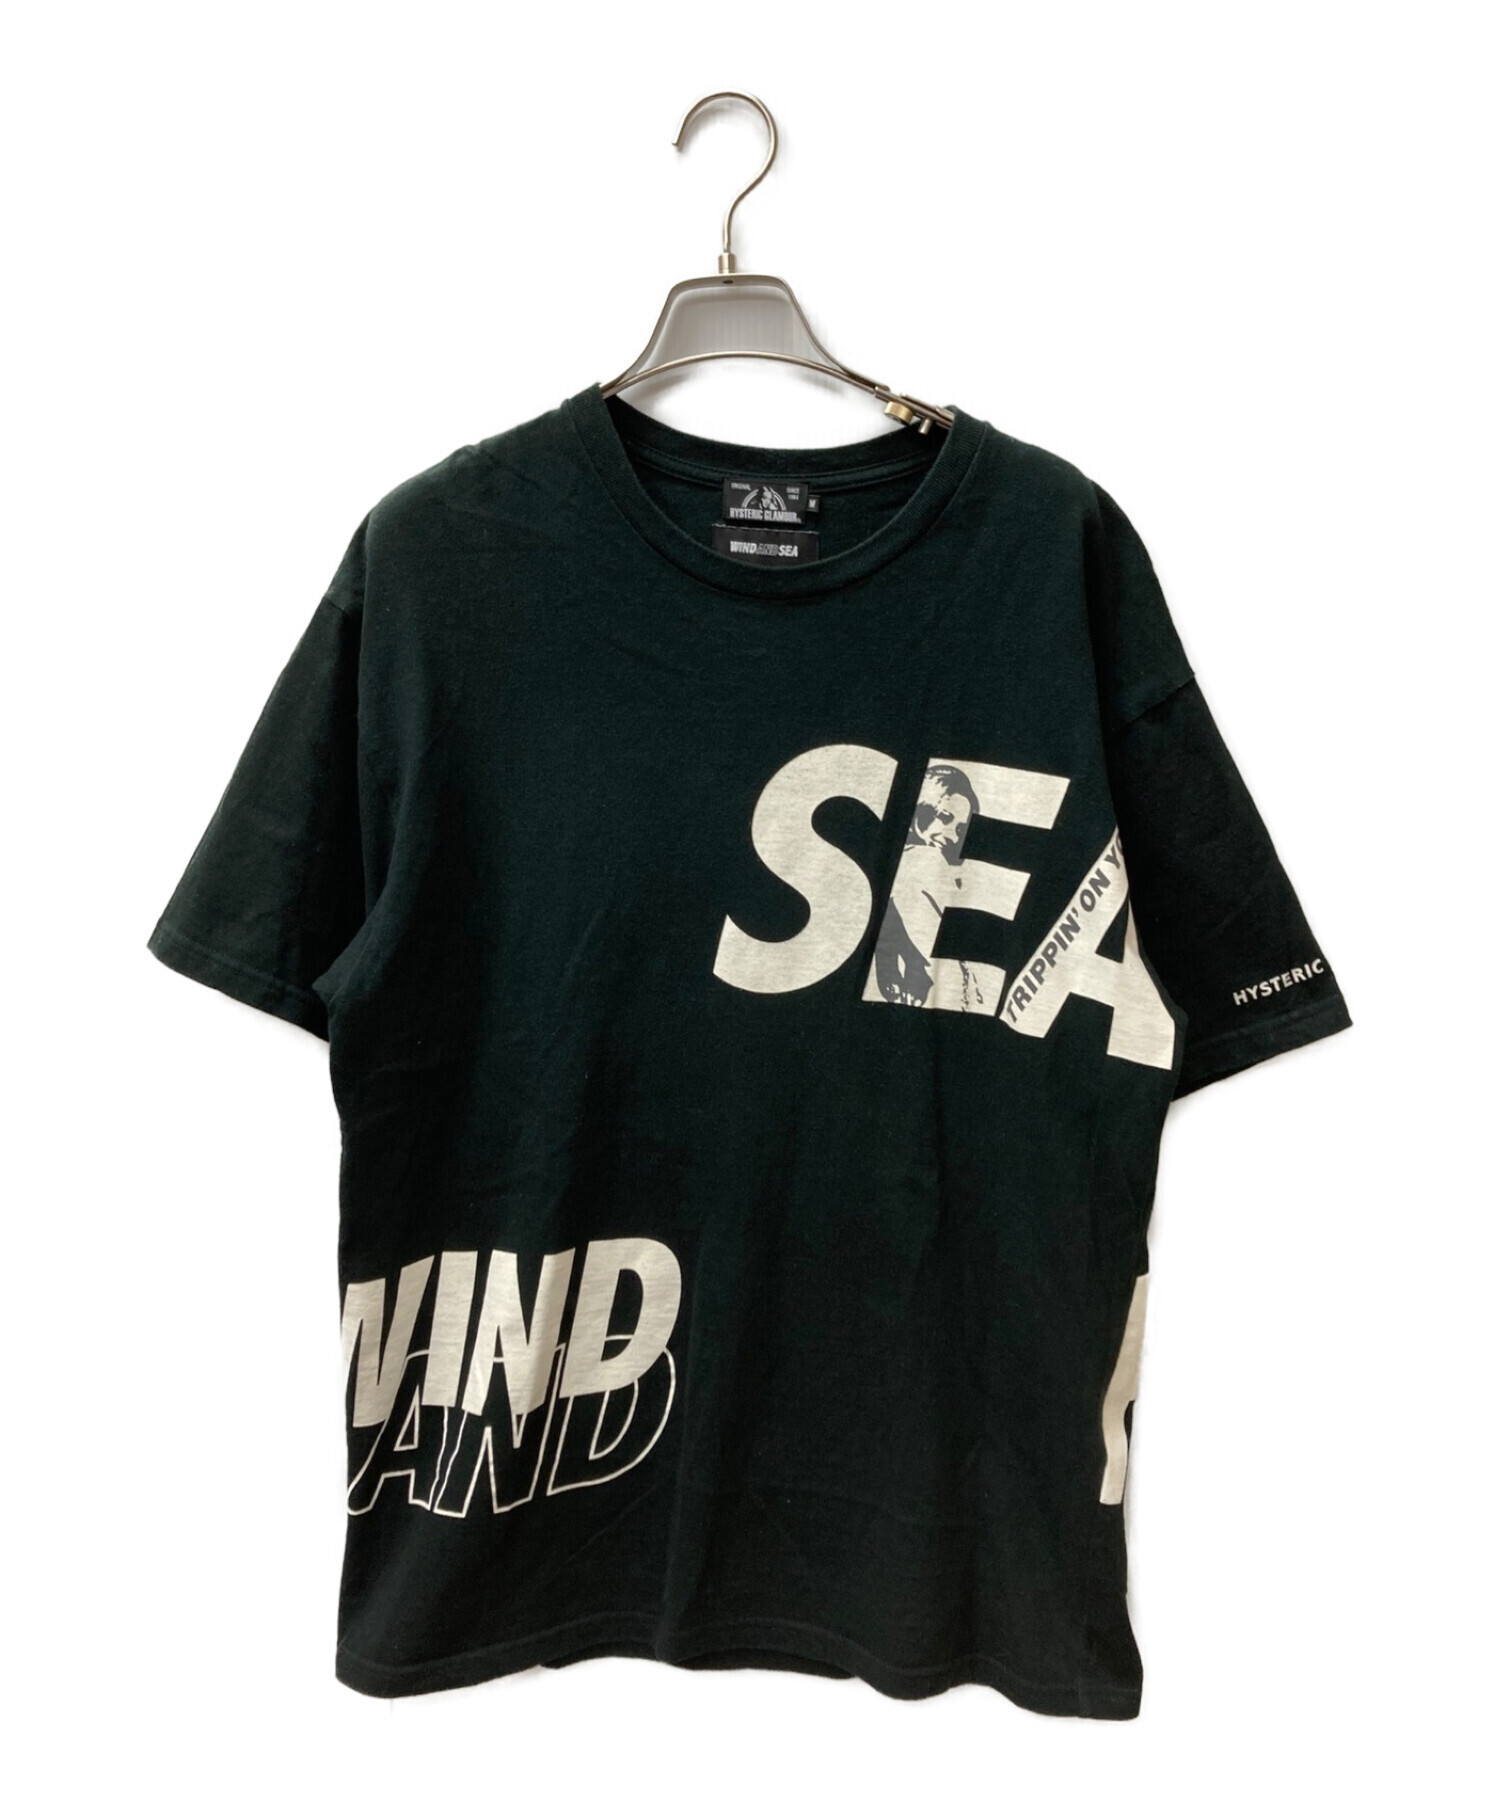 wind and sea × hysteric glamour Tシャツメンズ - Tシャツ/カットソー